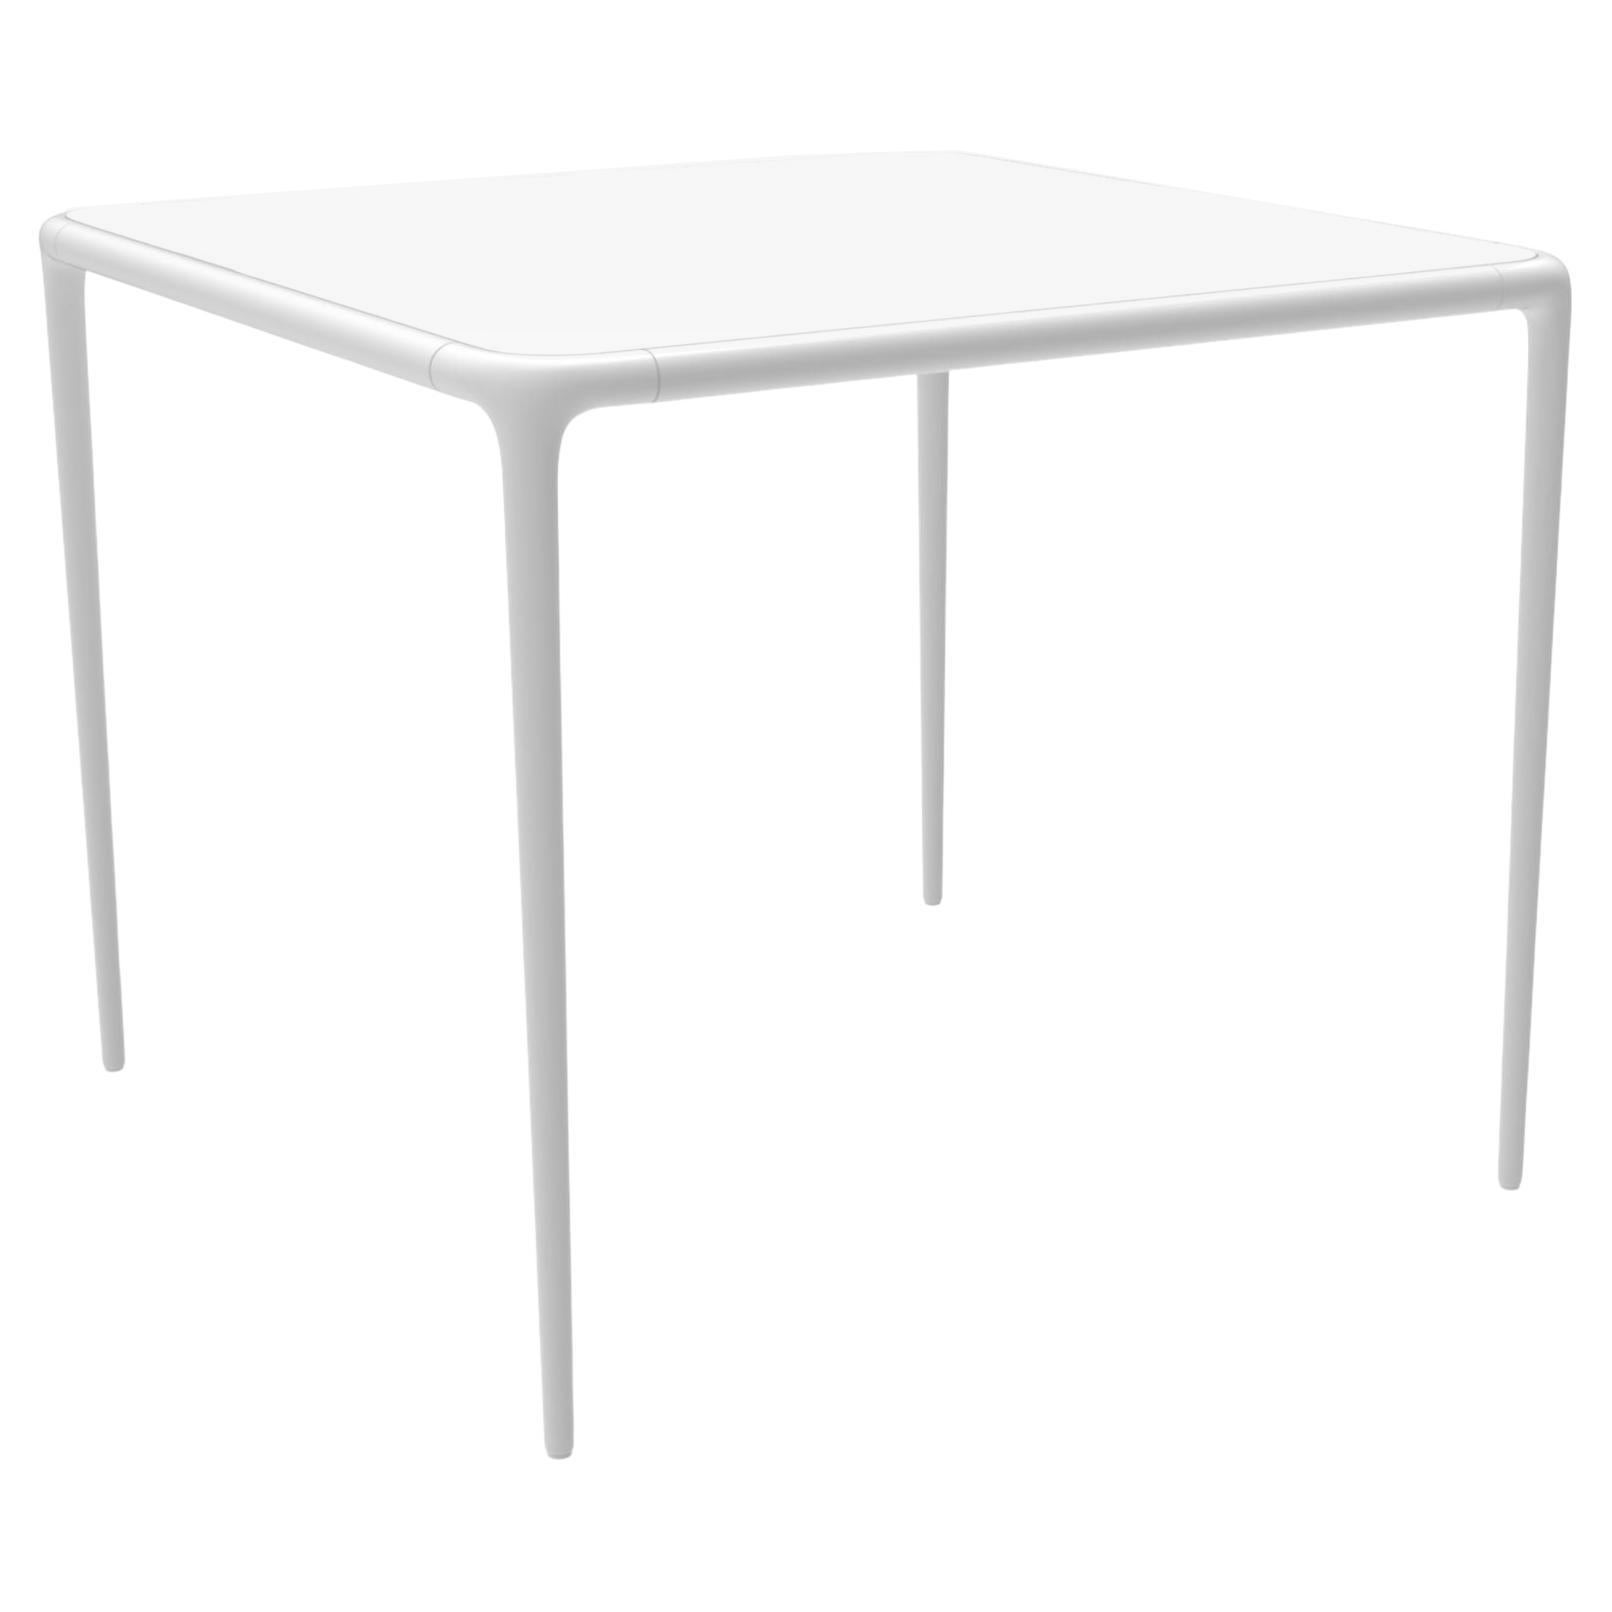 Xaloc White Glass Top Table 90 by Mowee For Sale